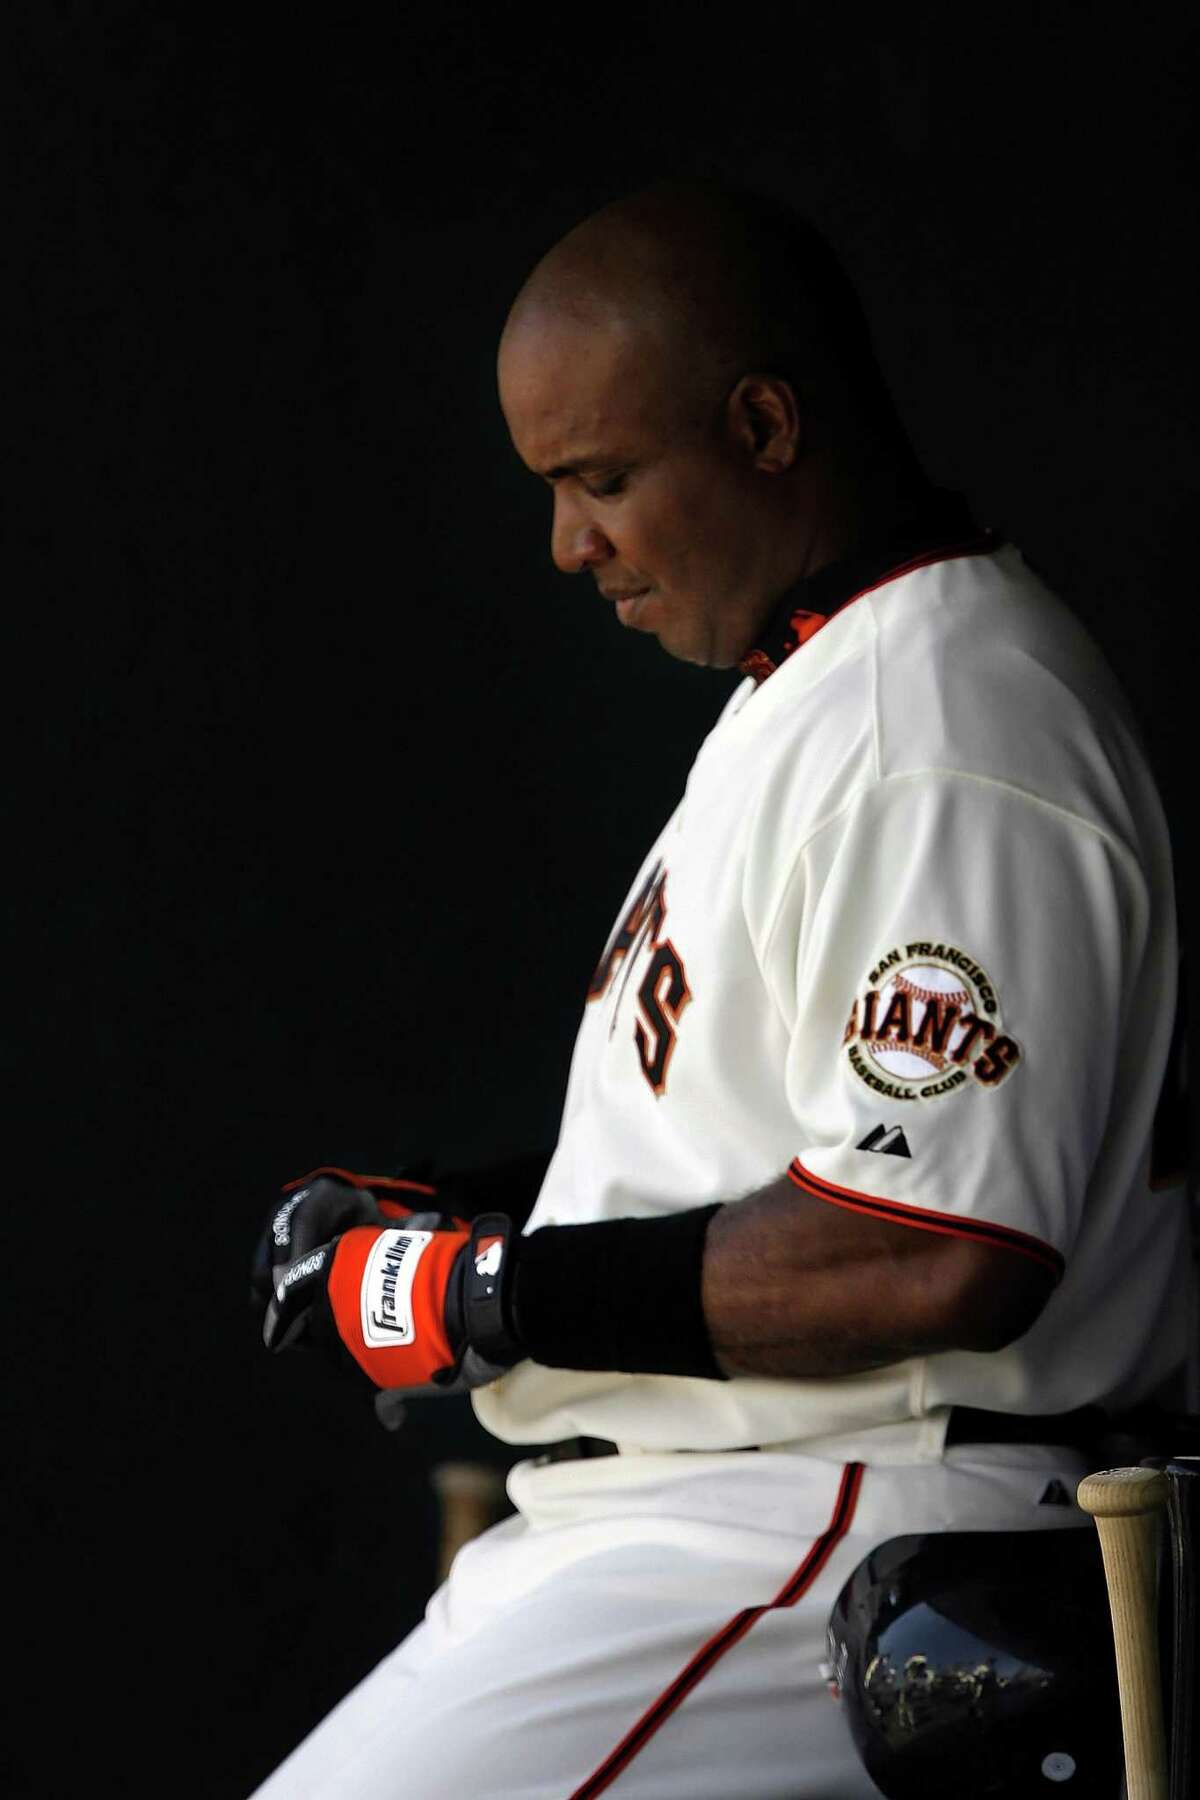 GIANTS20_013_CAG.JPG Barry Bonds waits to enter the game as a pinch hitter on Wednesday, July 19, 2006, during the final innings in the Giants' dugout. Bonds could be indicted as soon Thursday on federal charges of perjury and tax evasion. The San Francisco Giants played the Milwaukee Brewers at AT&T Park in San Francisco, Ca., on Wednesday, July 19, 2006. Photo by Carlos Avila Gonzalez/The San Francisco Chronicle Photo taken on 7/19/06, in San Francisco, Ca, USA **All names cq (Roster)